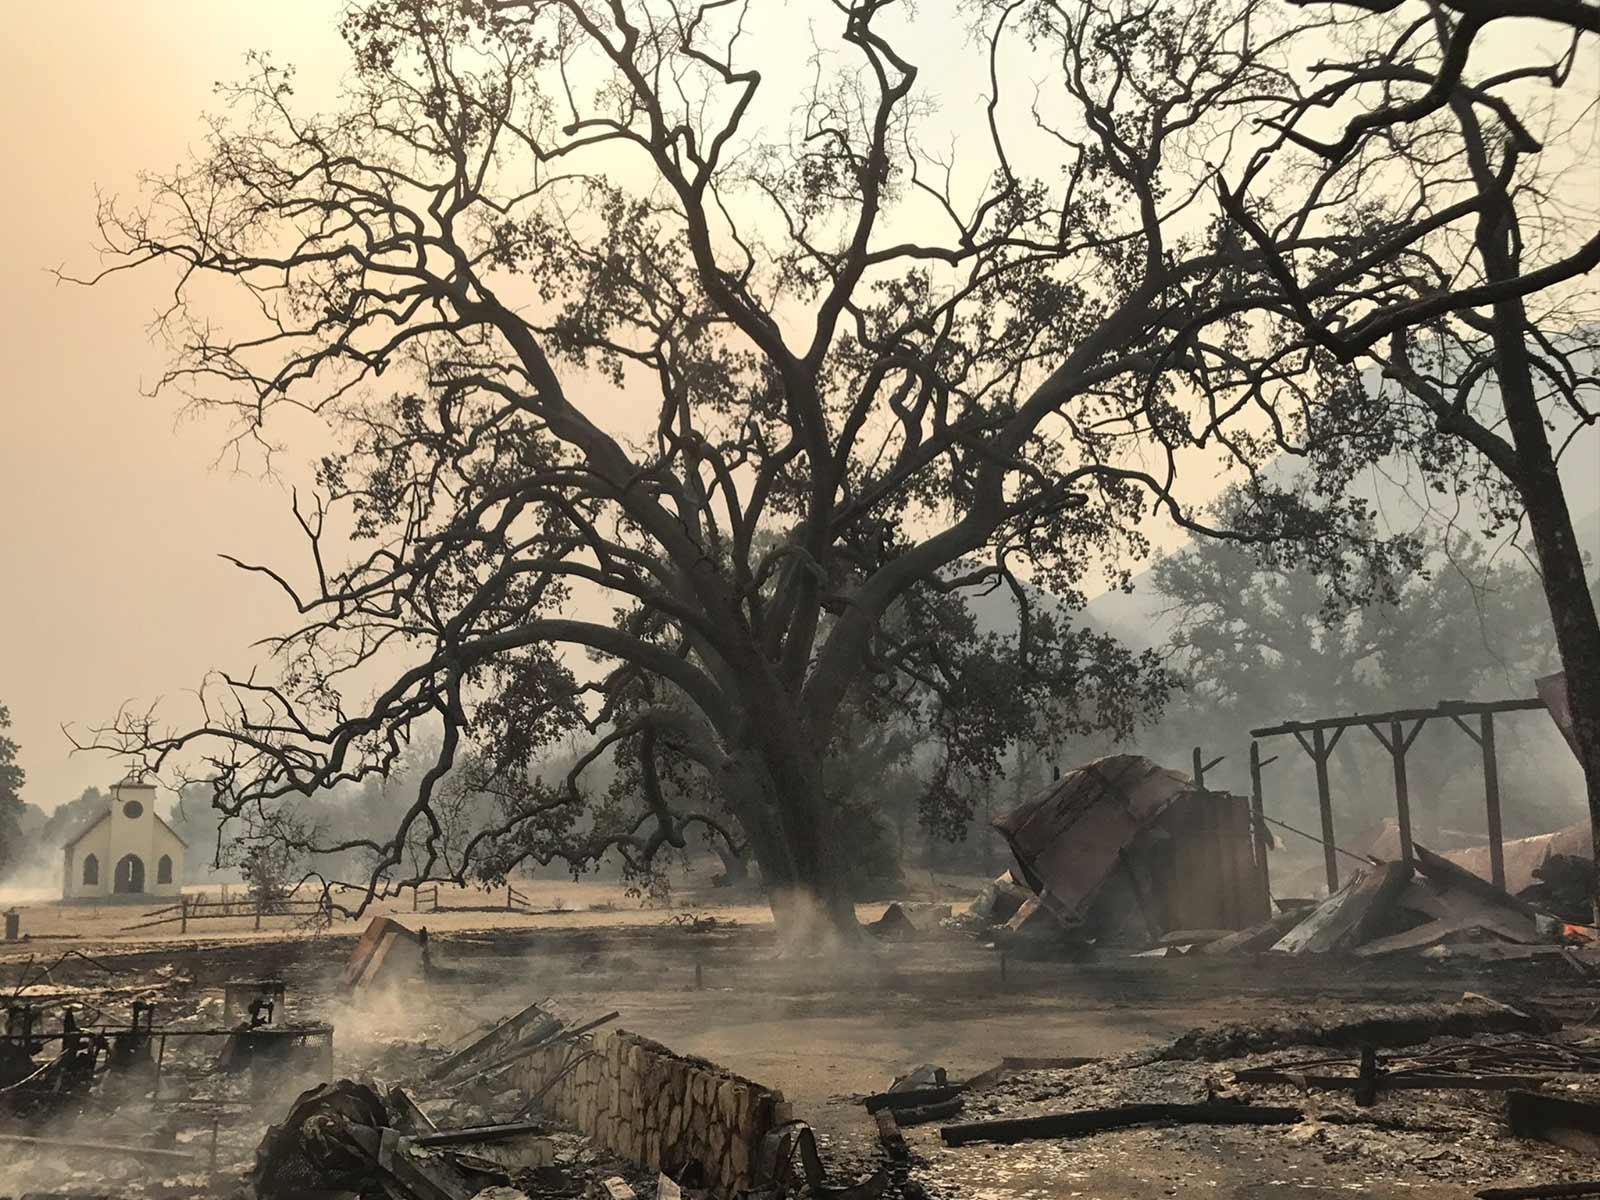 ‘Westworld’ Set Burns to the Ground During California Wildfires